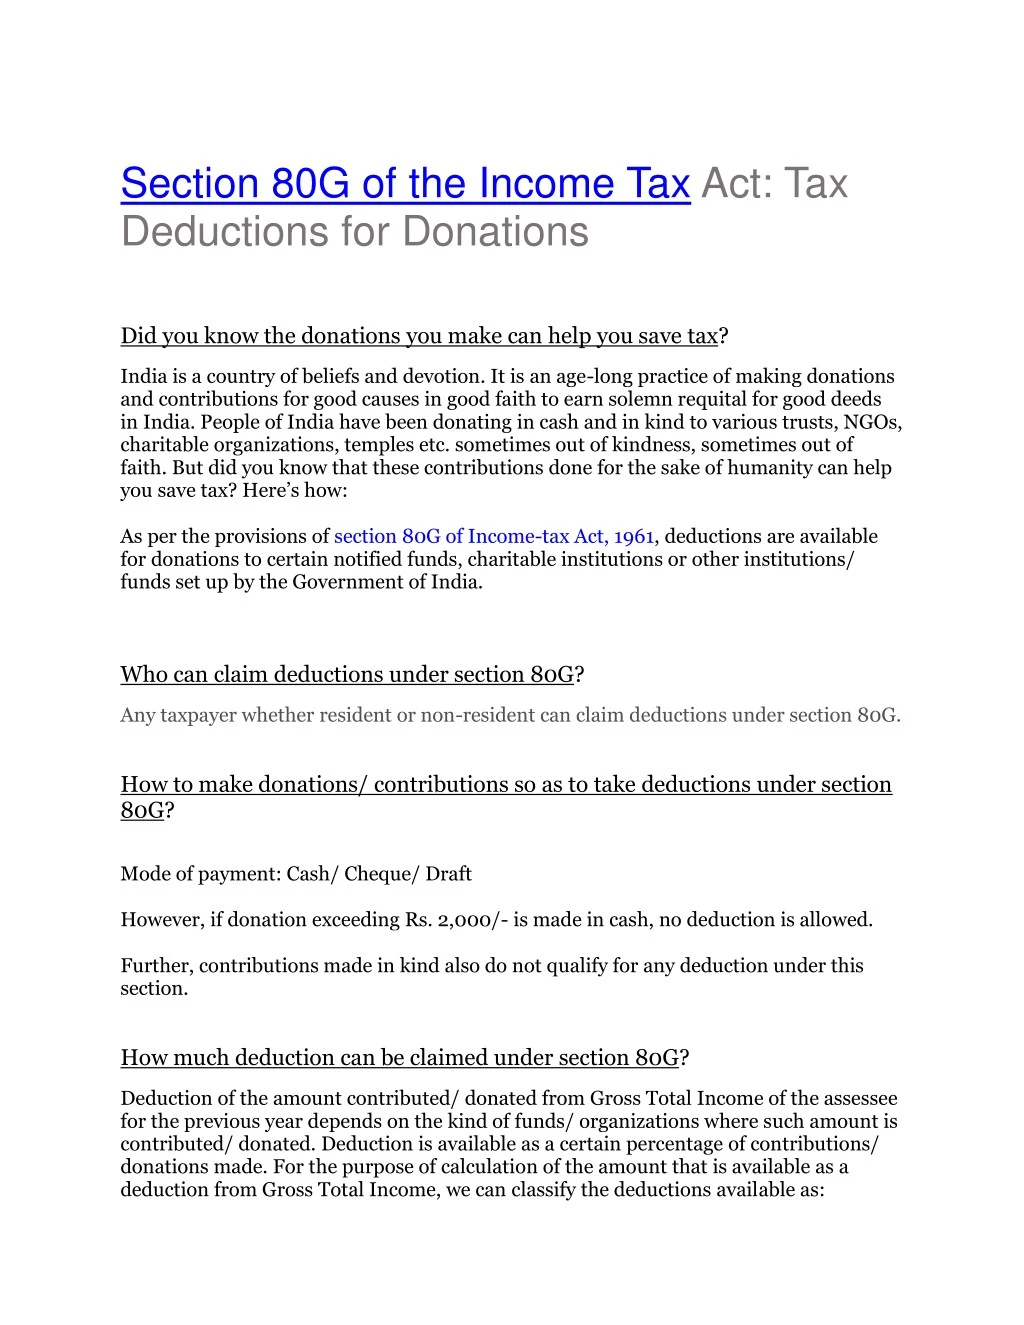 section 80g of the income tax act tax deductions